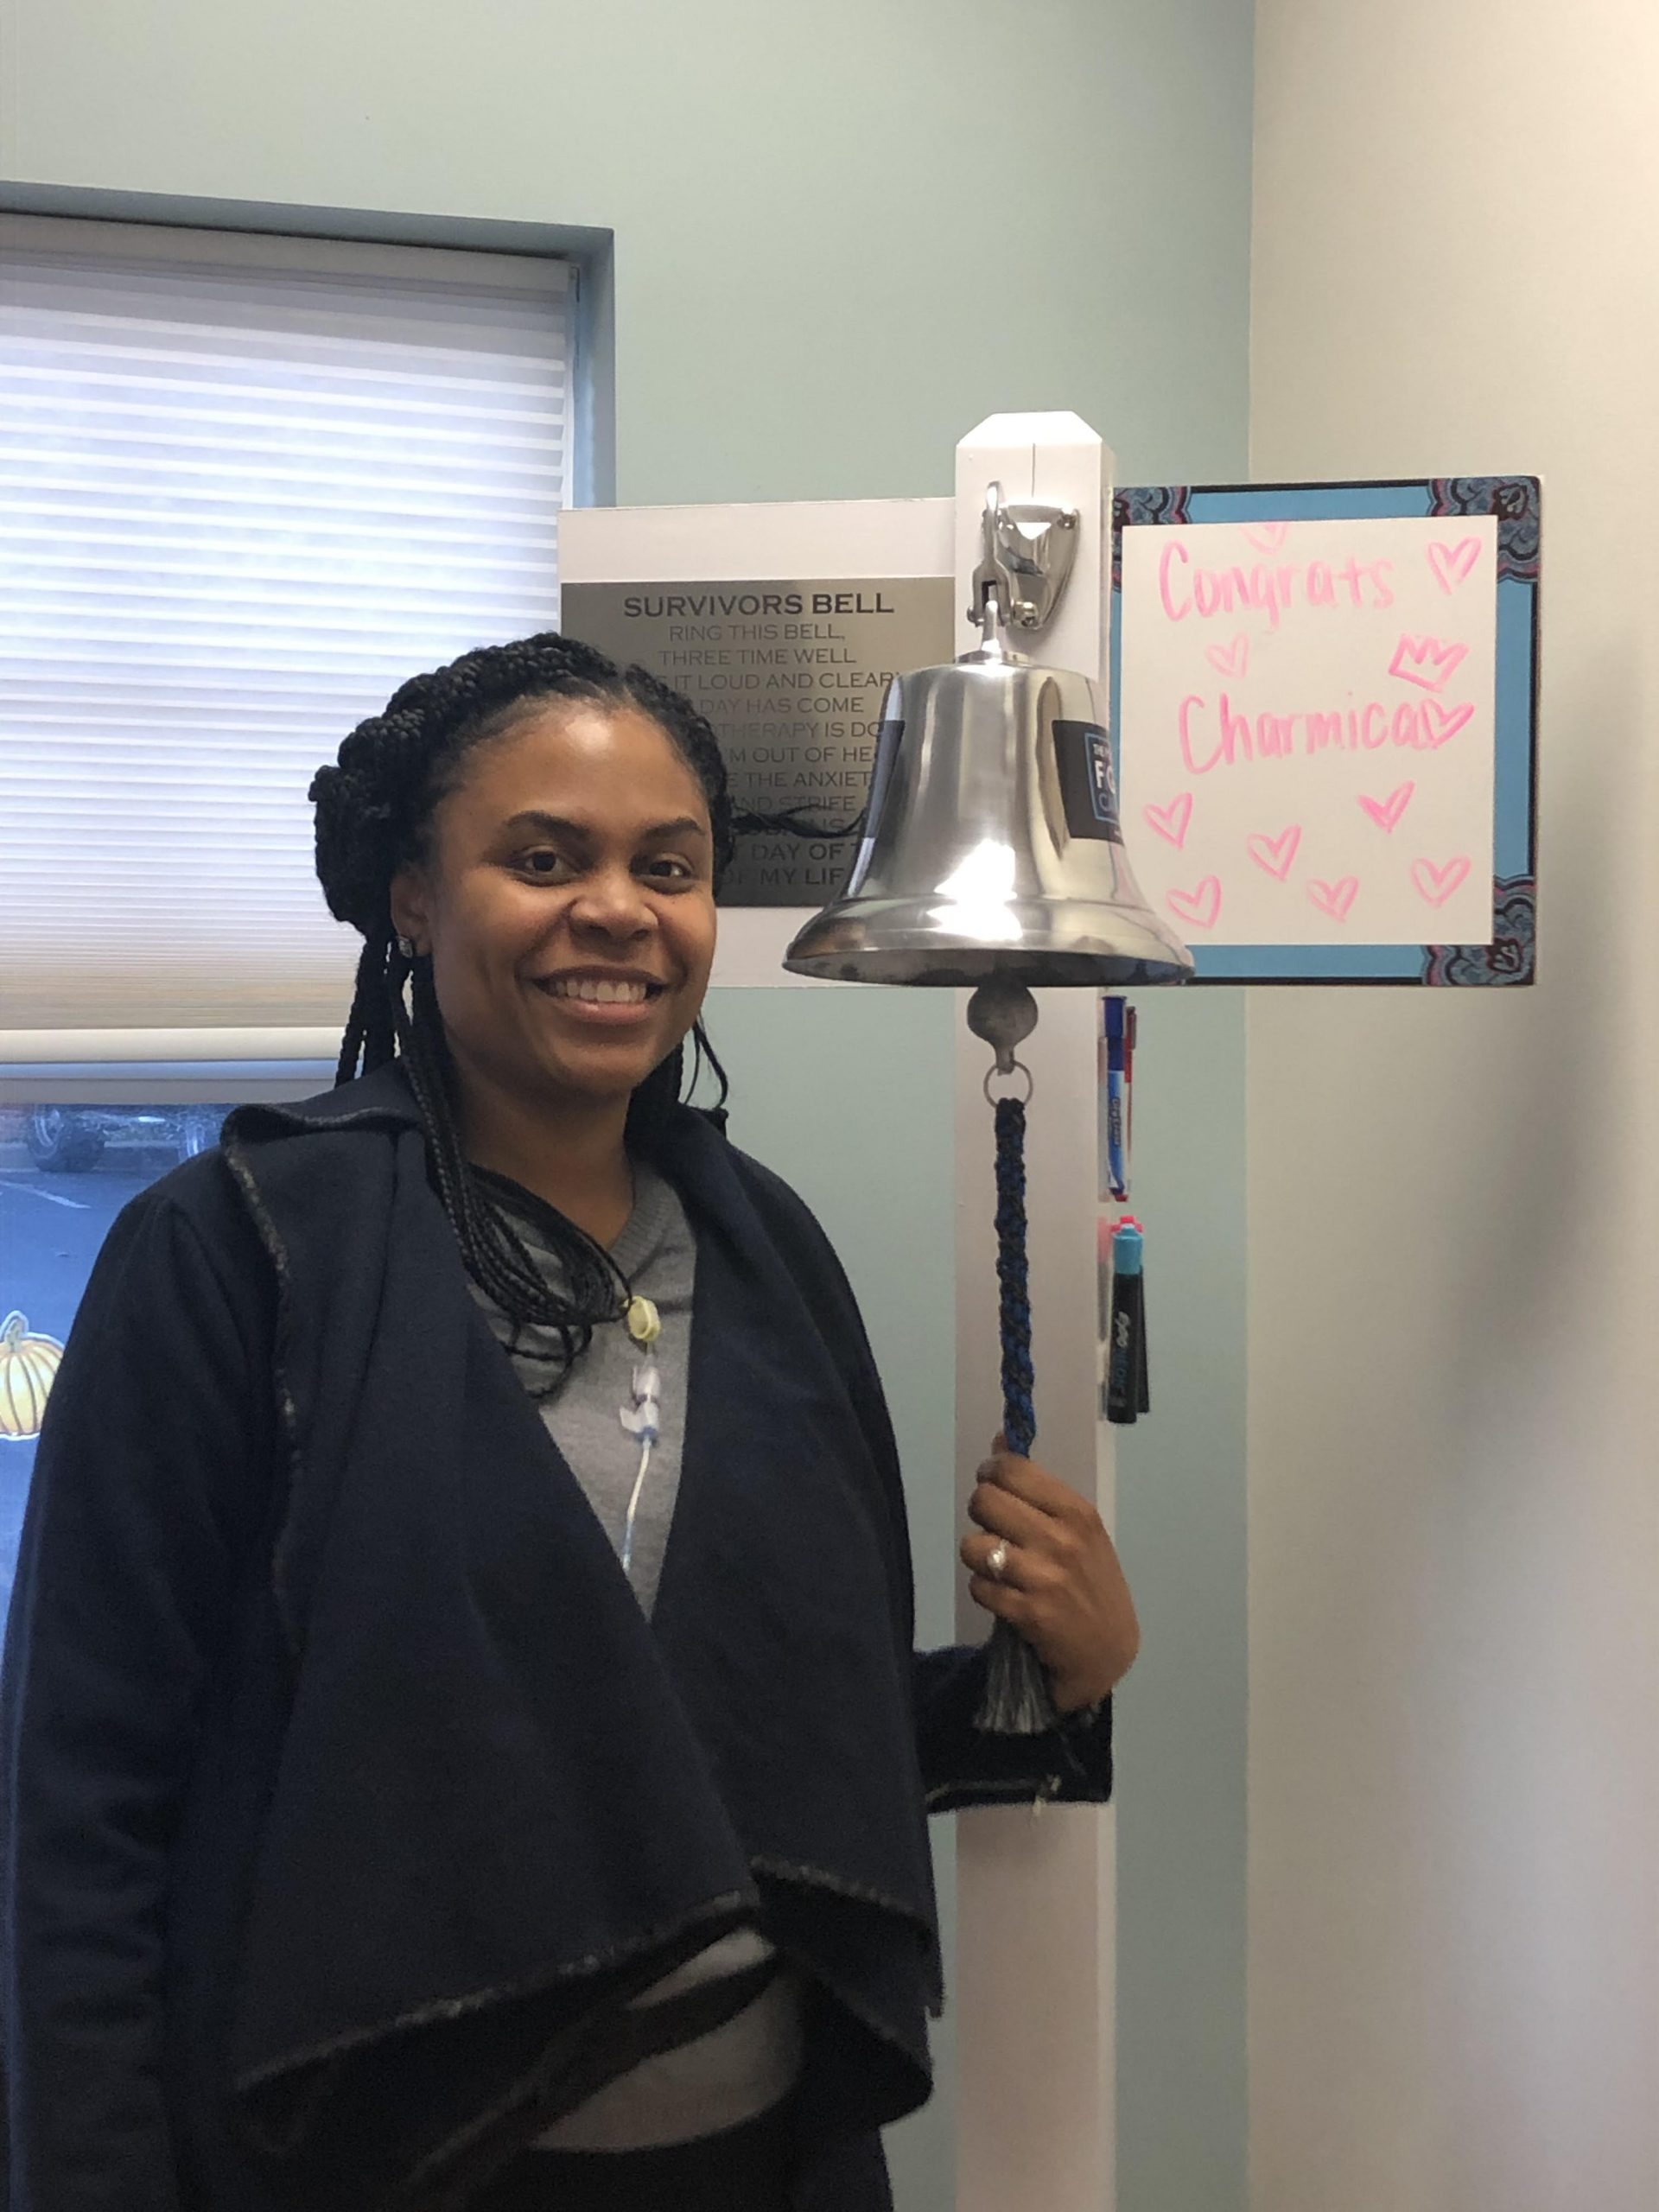 Charmica Epps ringing her bell after cancer treatment.